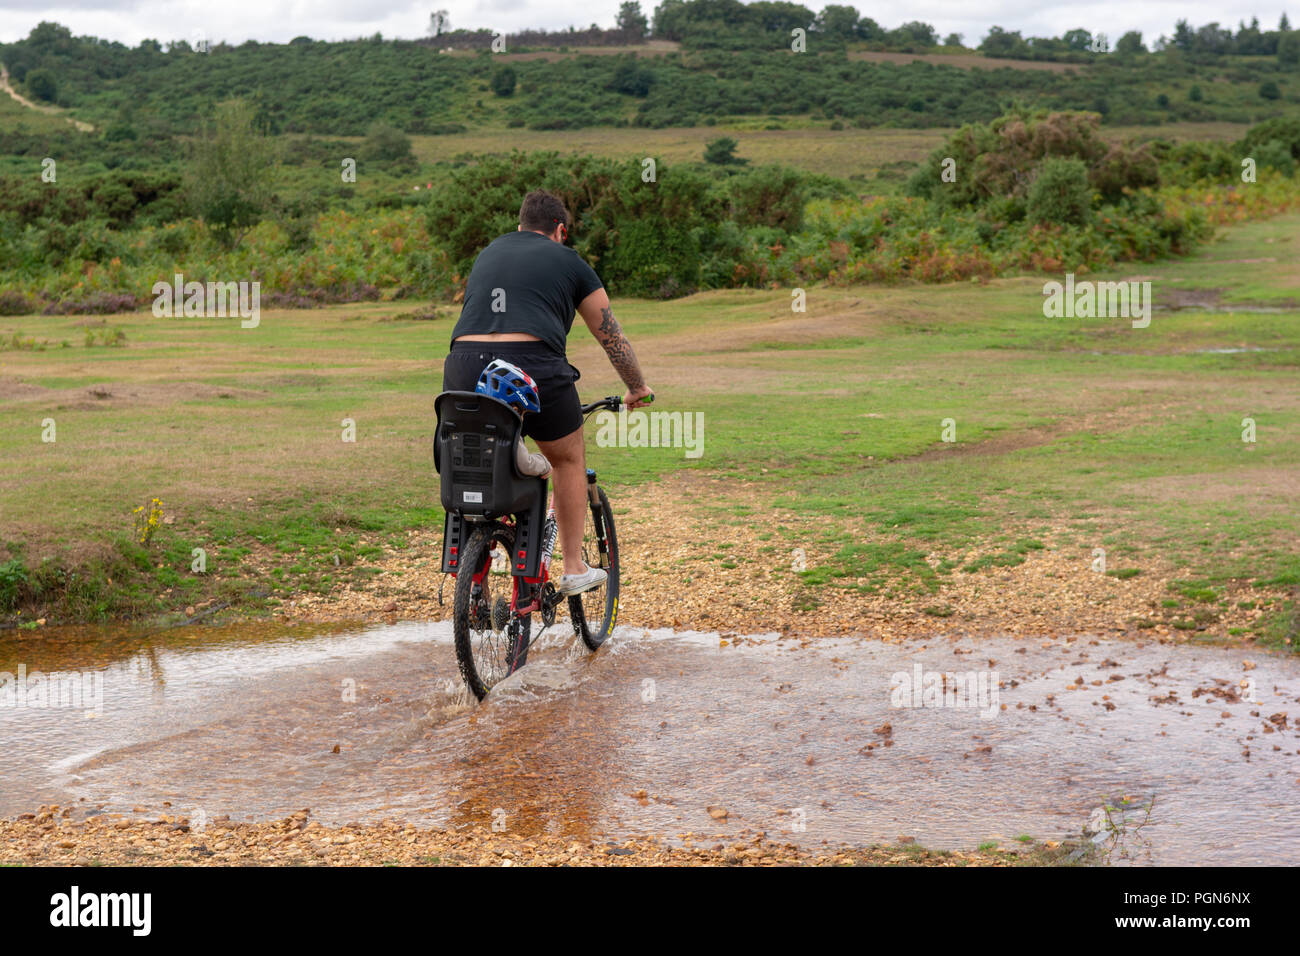 Man wearing shorts cycling through water with a small child on the back of the bicycle. Stock Photo